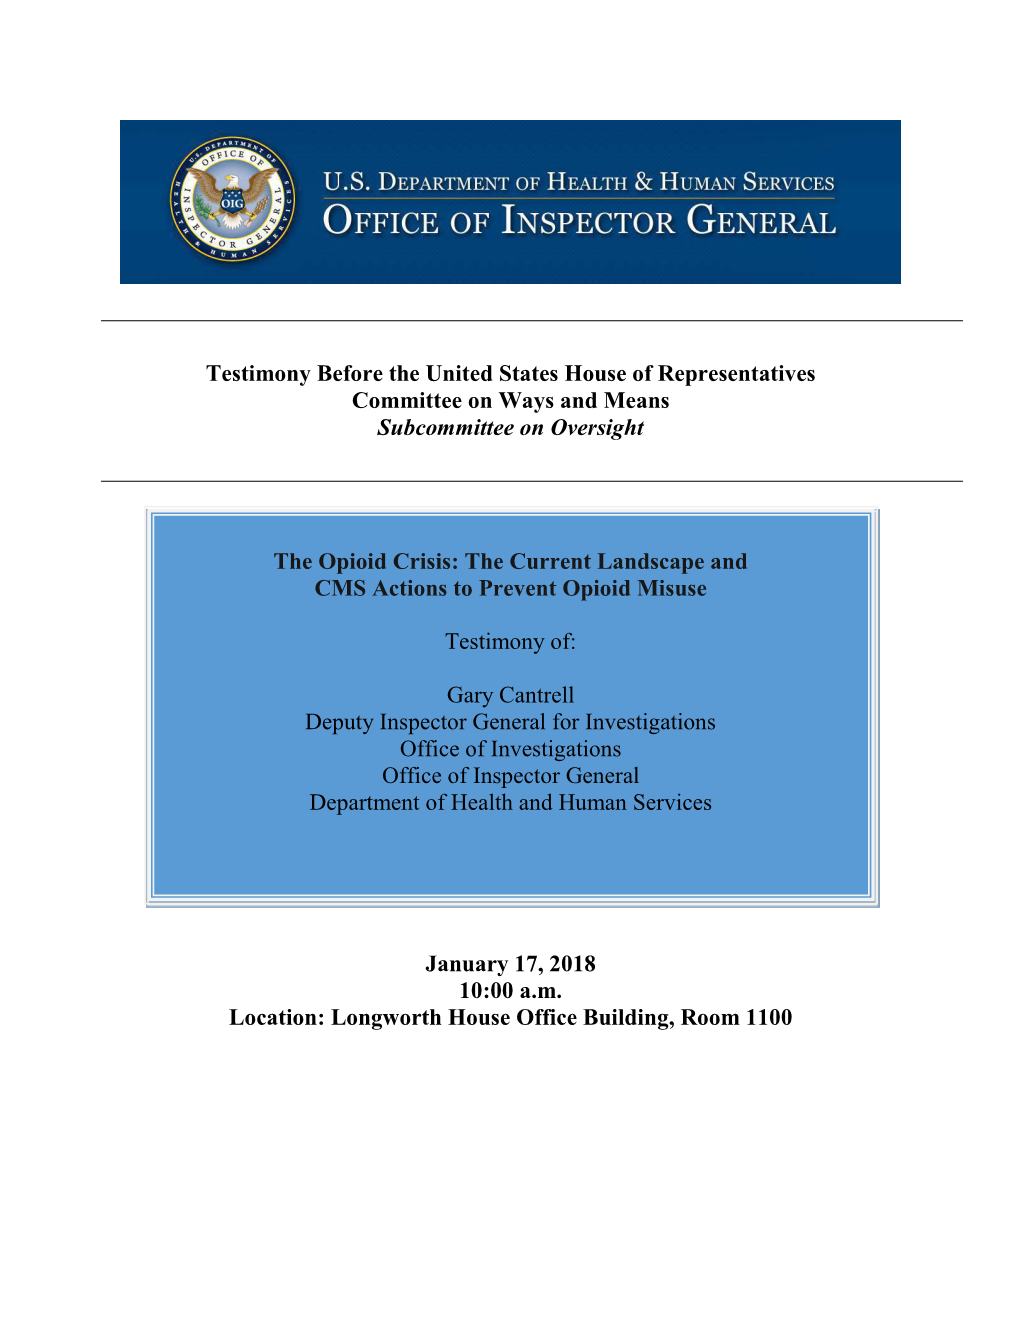 Testimony Before the United States House of Representatives Committee on Ways and Means Subcommittee on Oversight